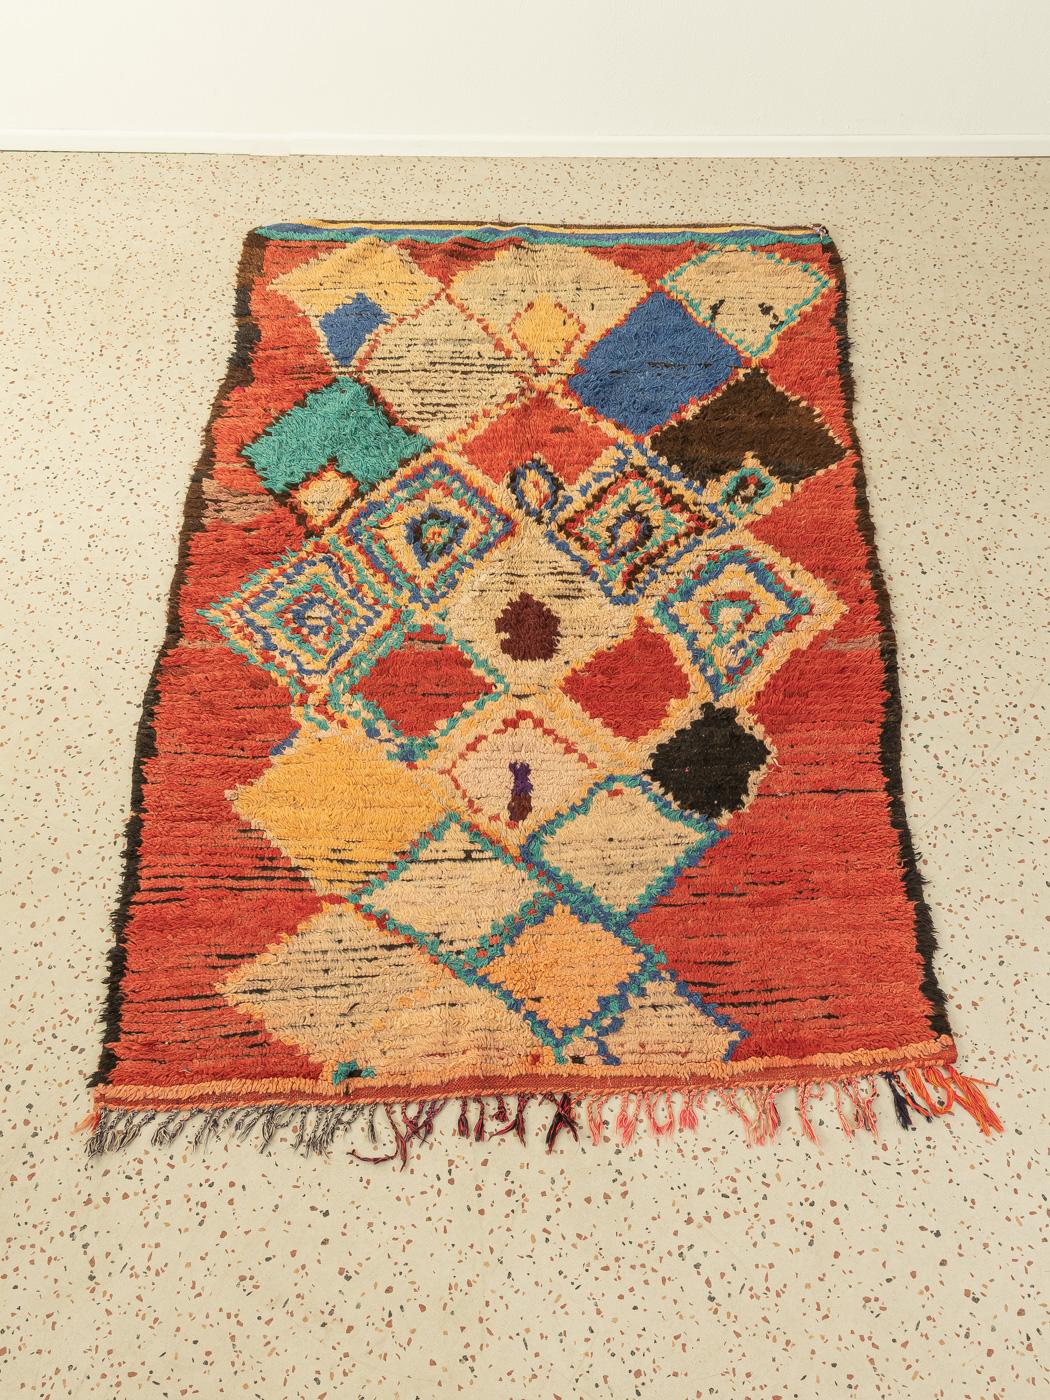 Hand-Woven Vintage Moroccan Azilal Berber Rug High Atlas Mountains Red Blue Beige Black For Sale